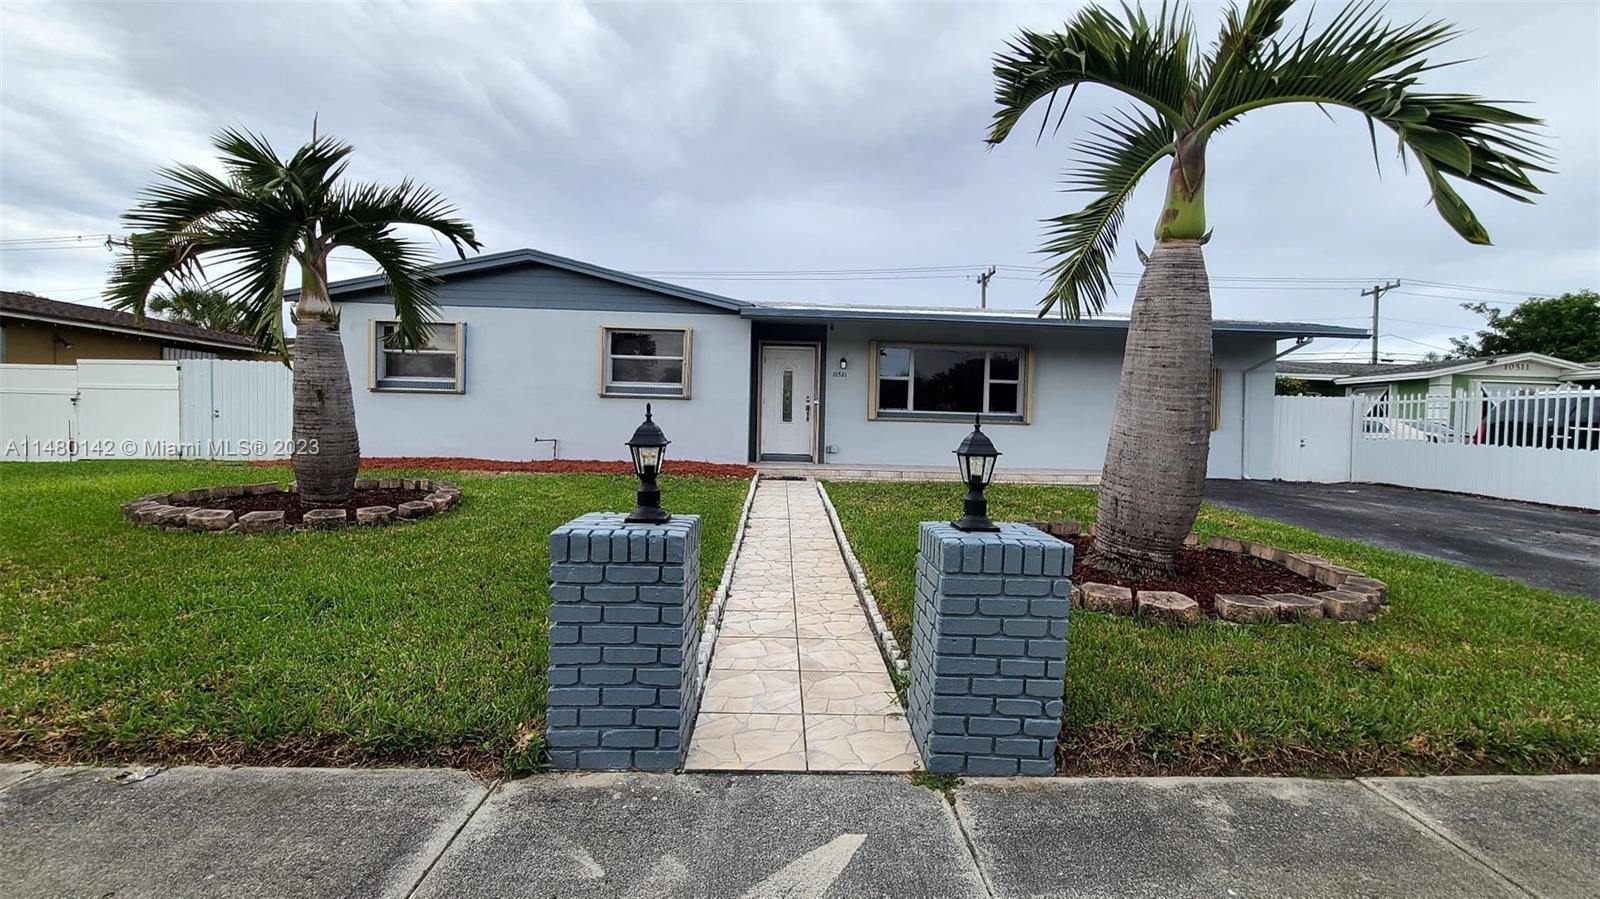 Property for Sale at Address Not Disclosed, Miami, Broward County, Florida - Bedrooms: 3 
Bathrooms: 2  - $639,000